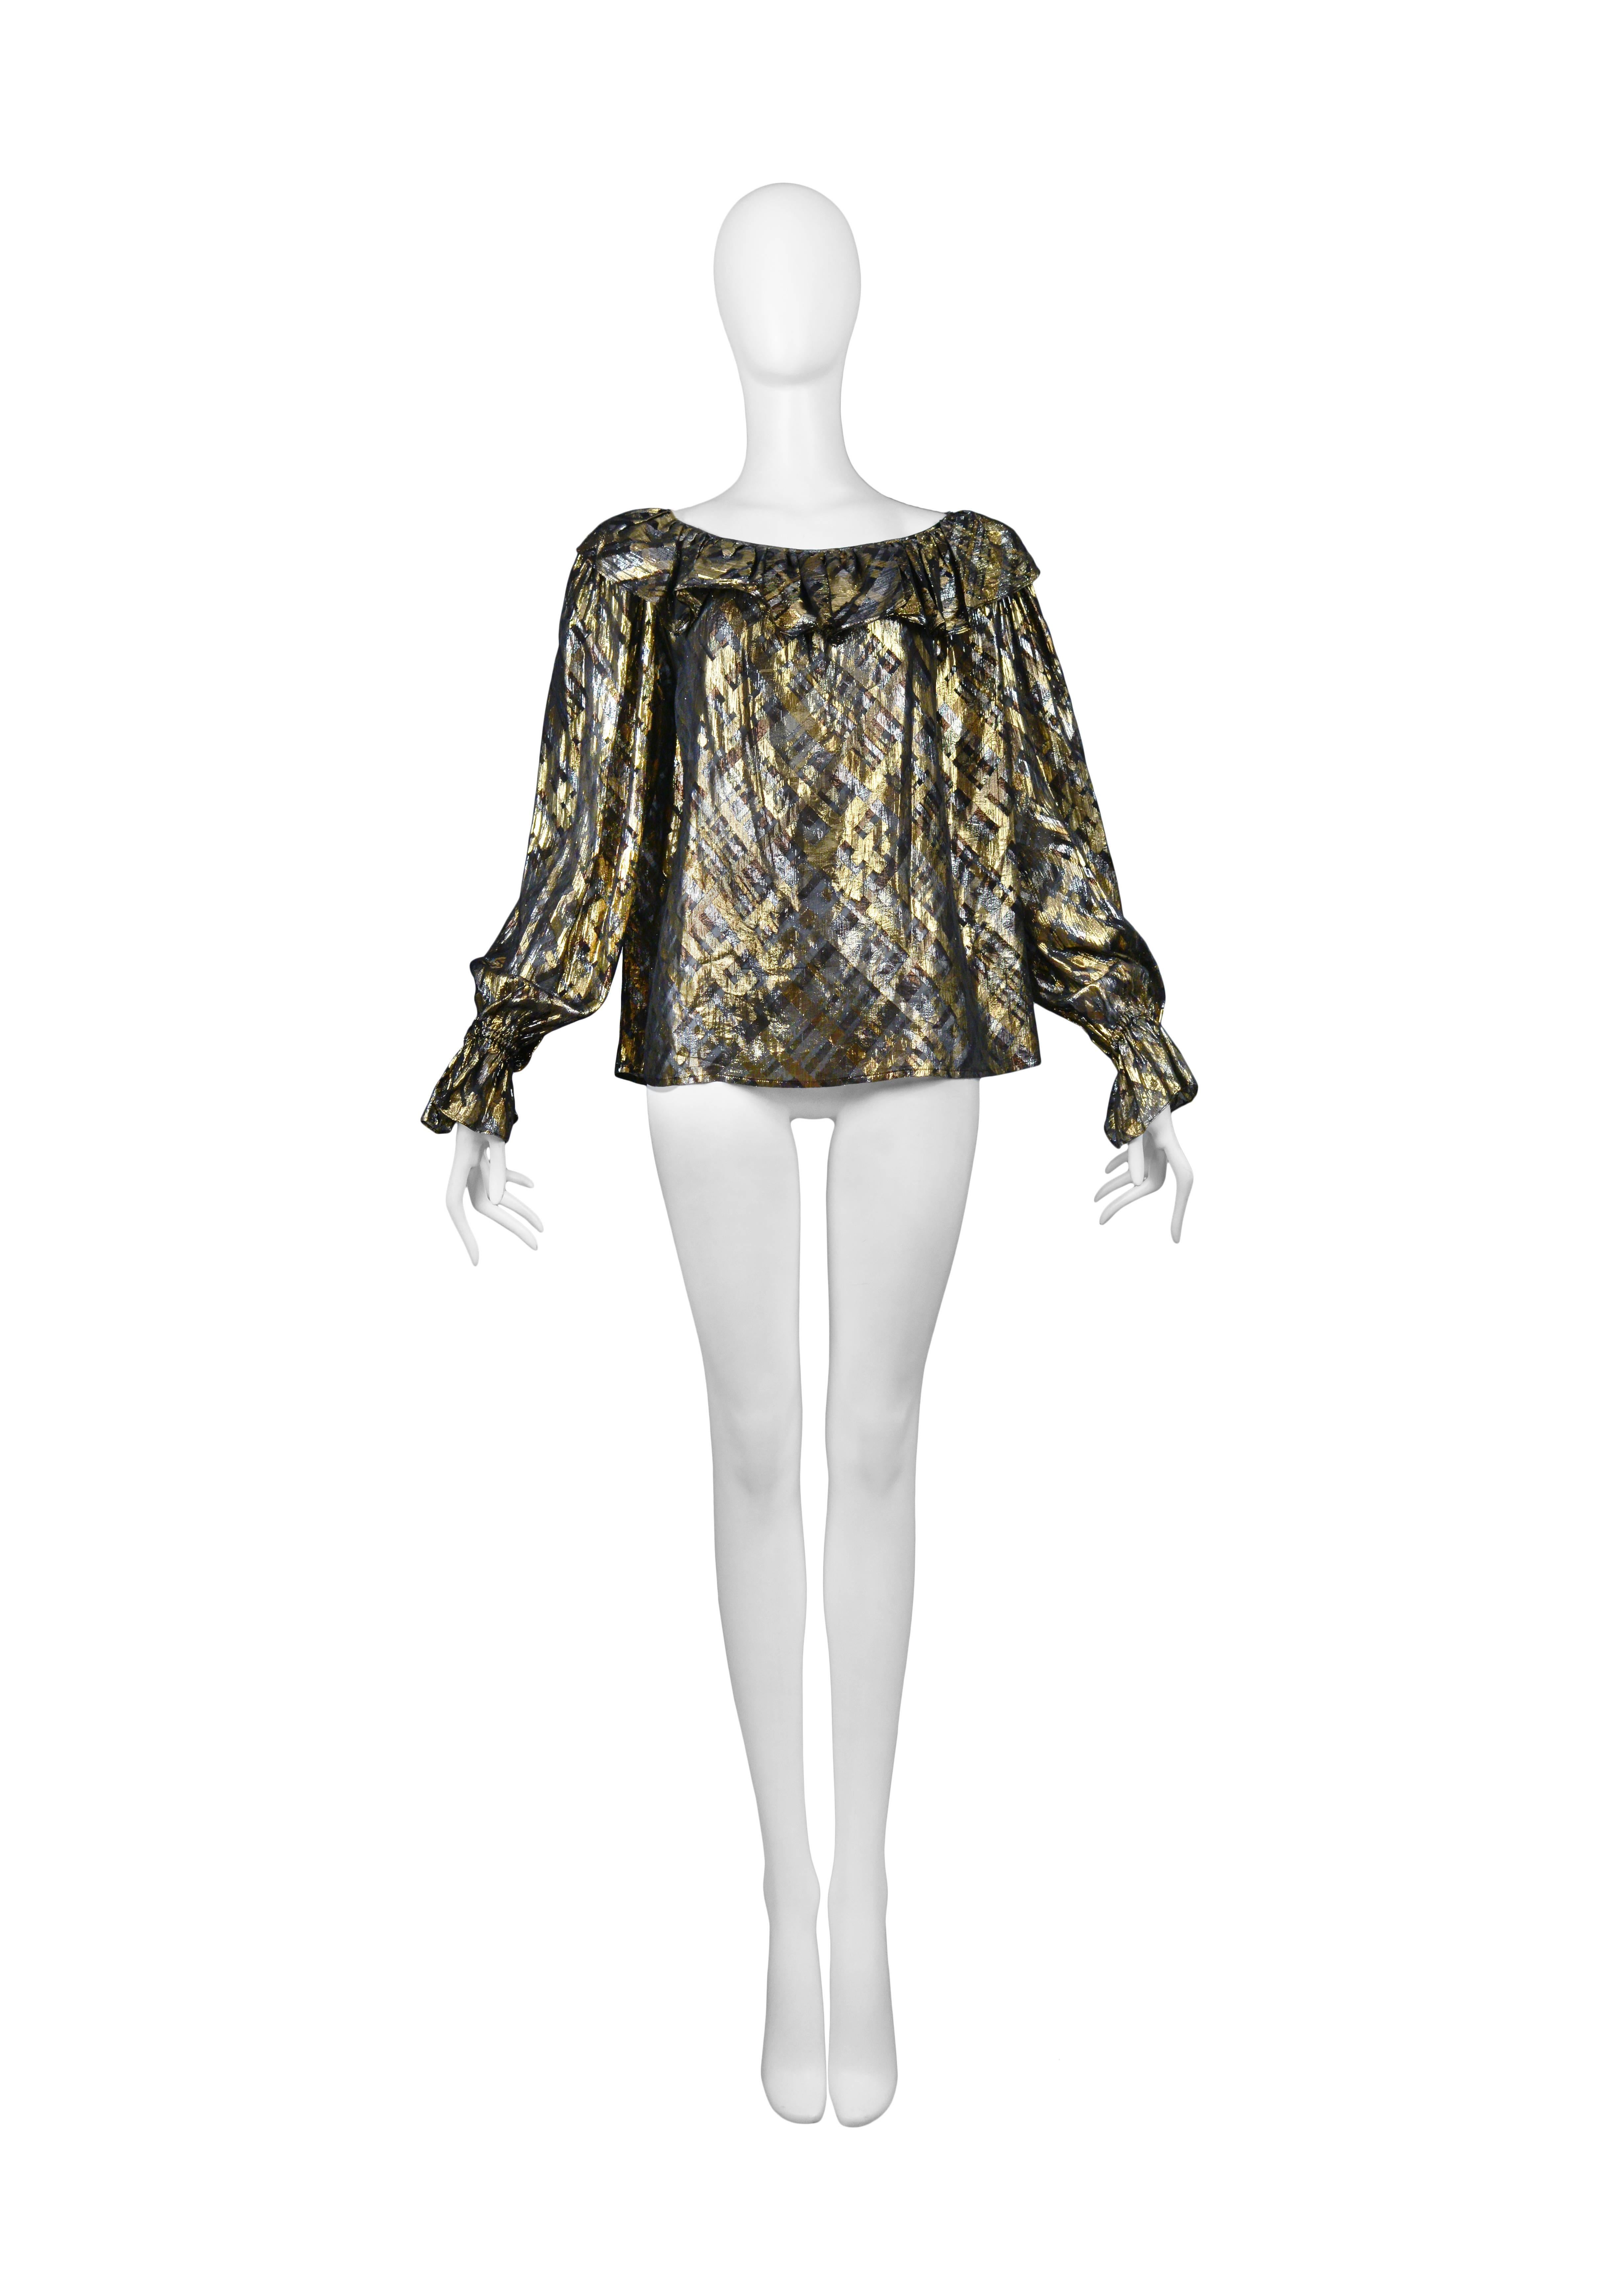 Vintage Yves Saint Laurent gold and grey plaid lame blouse featuring ruffle detailing along the neckline and cuffs.
Please inquire for additional images.